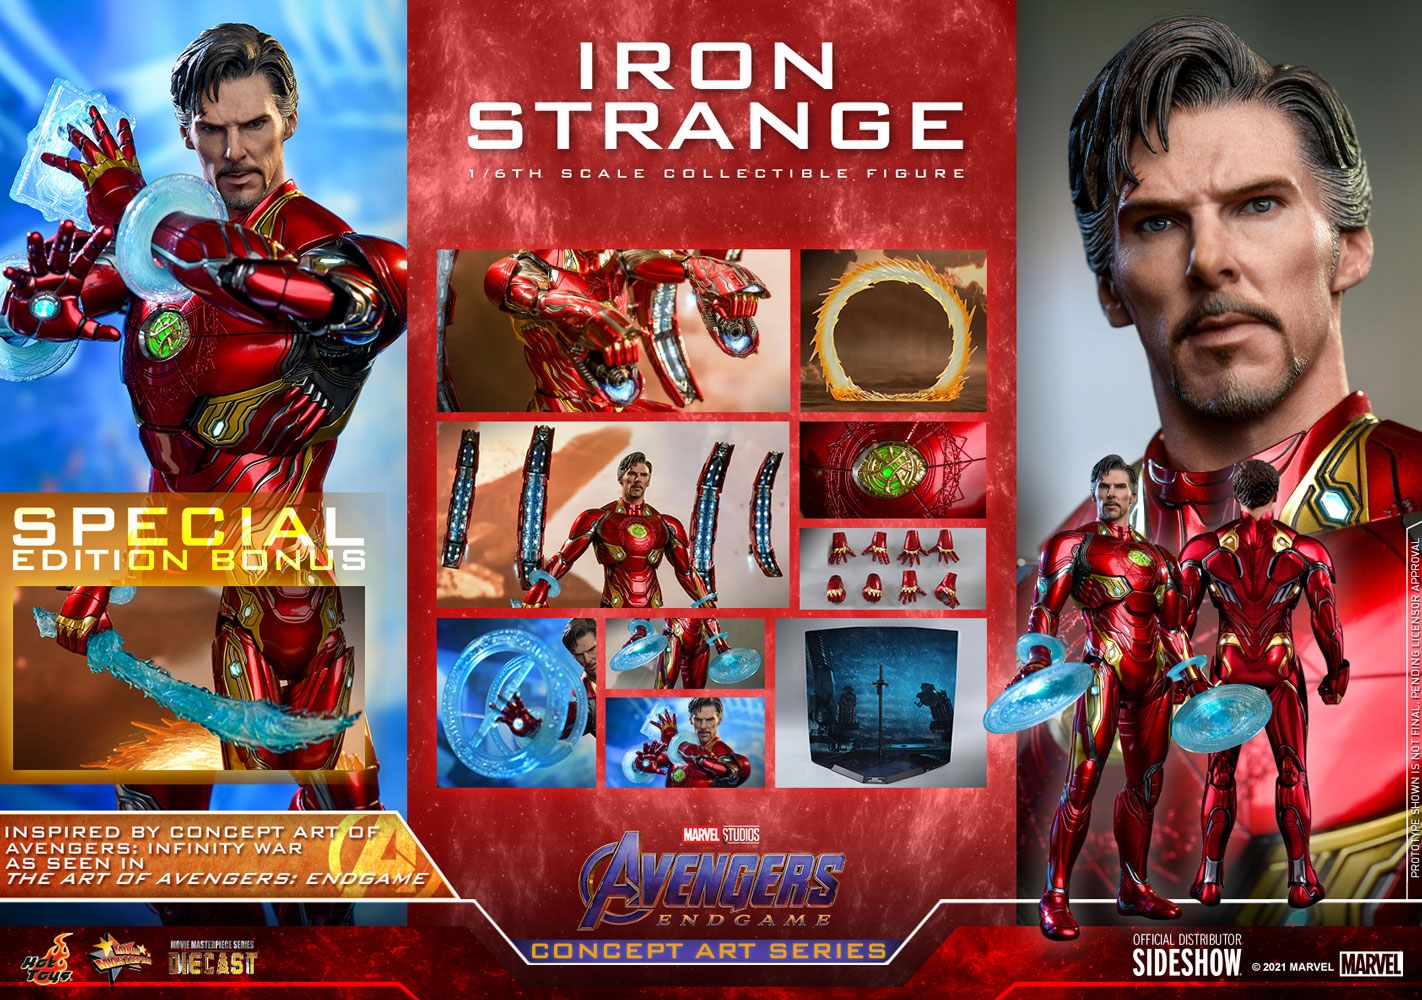 iron-strange-special-edition_marvel_gallery_60ef89aadc0a0.jpg